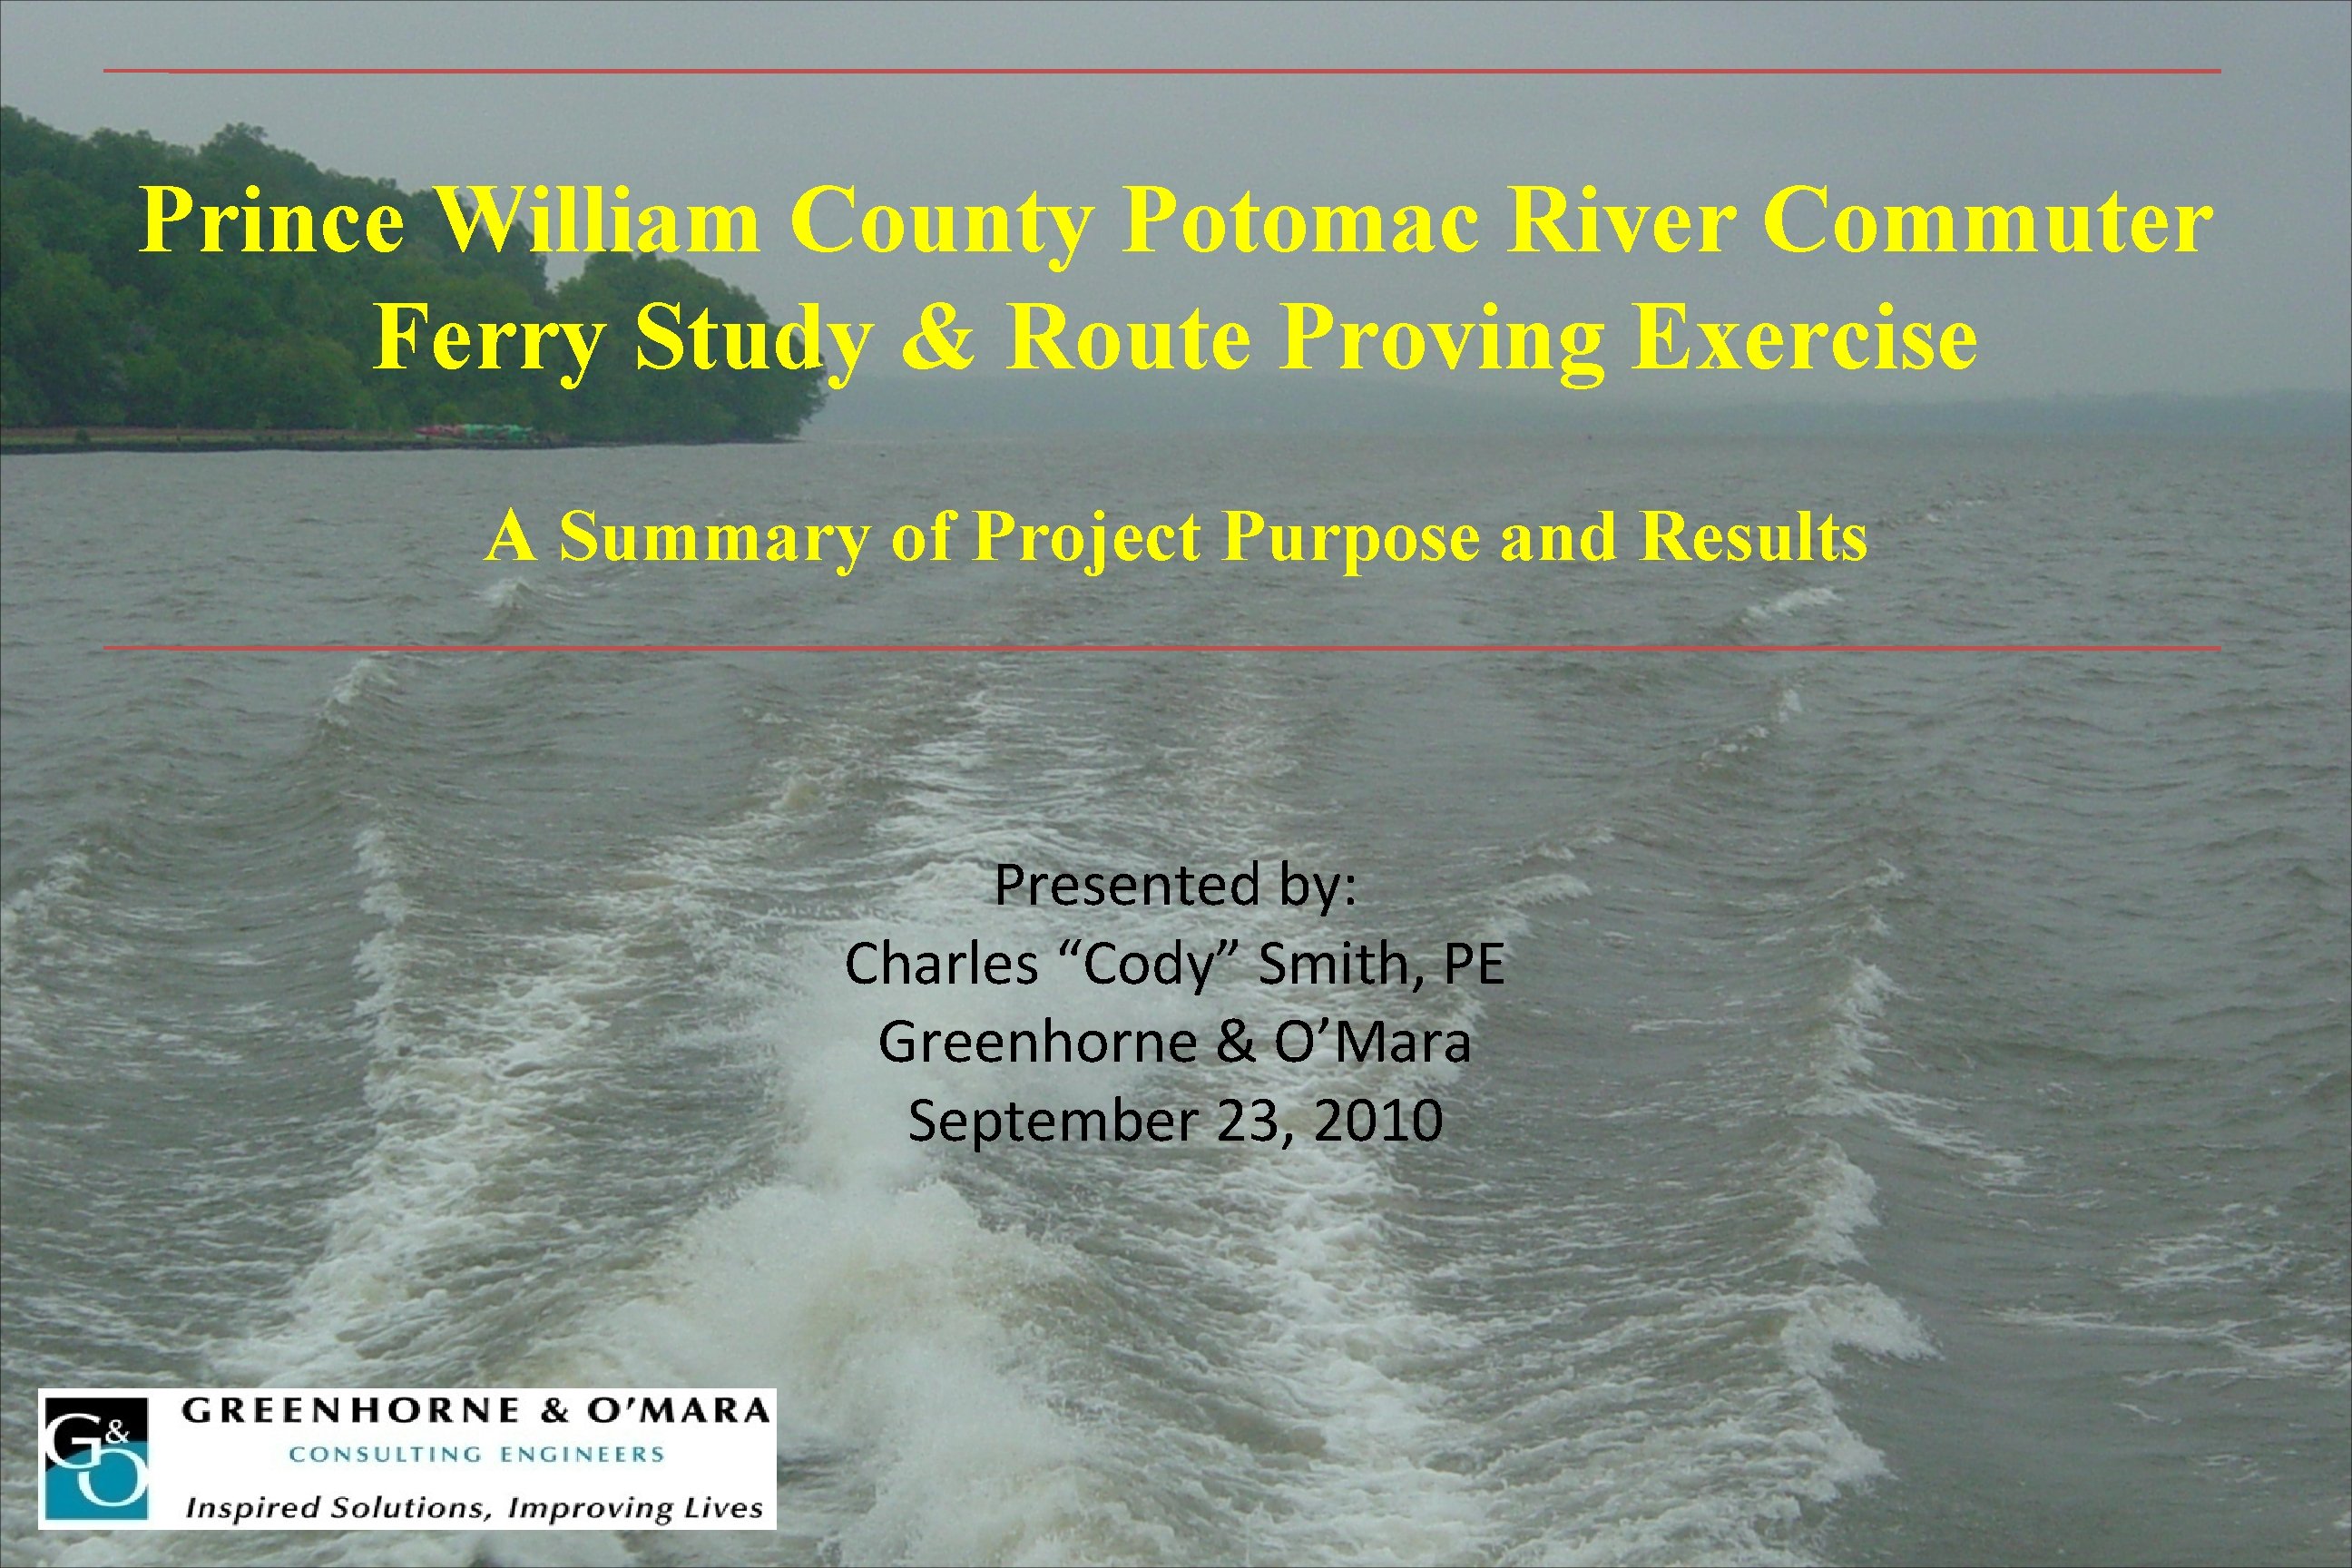 Prince William County Potomac River Commuter Ferry Study & Route Proving Exercise A Summary